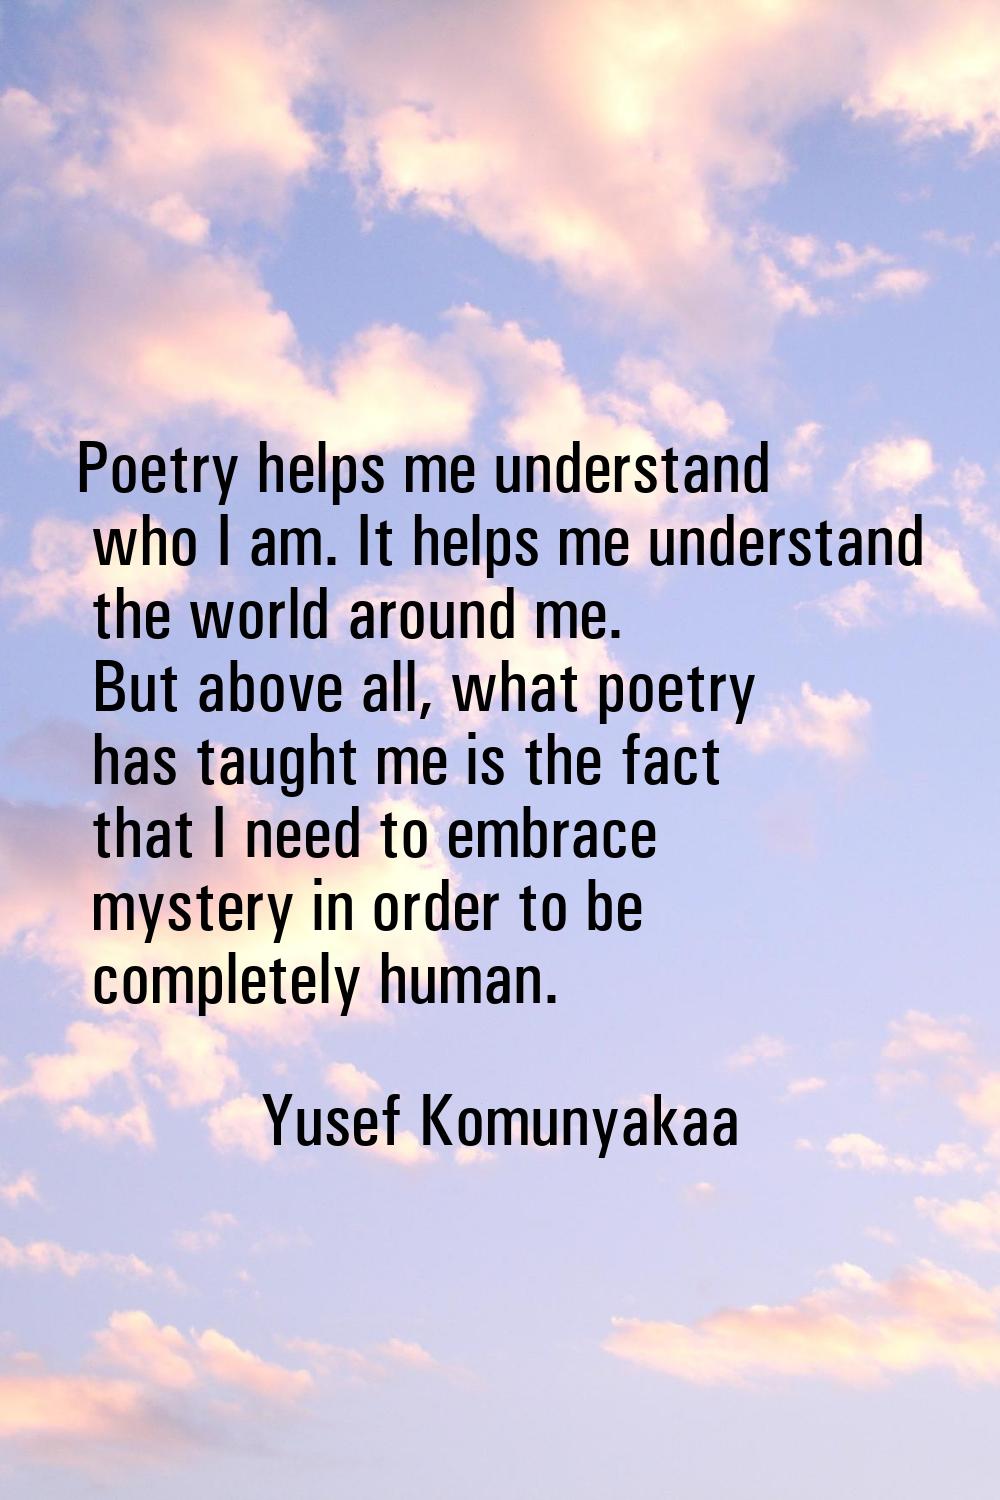 Poetry helps me understand who I am. It helps me understand the world around me. But above all, wha